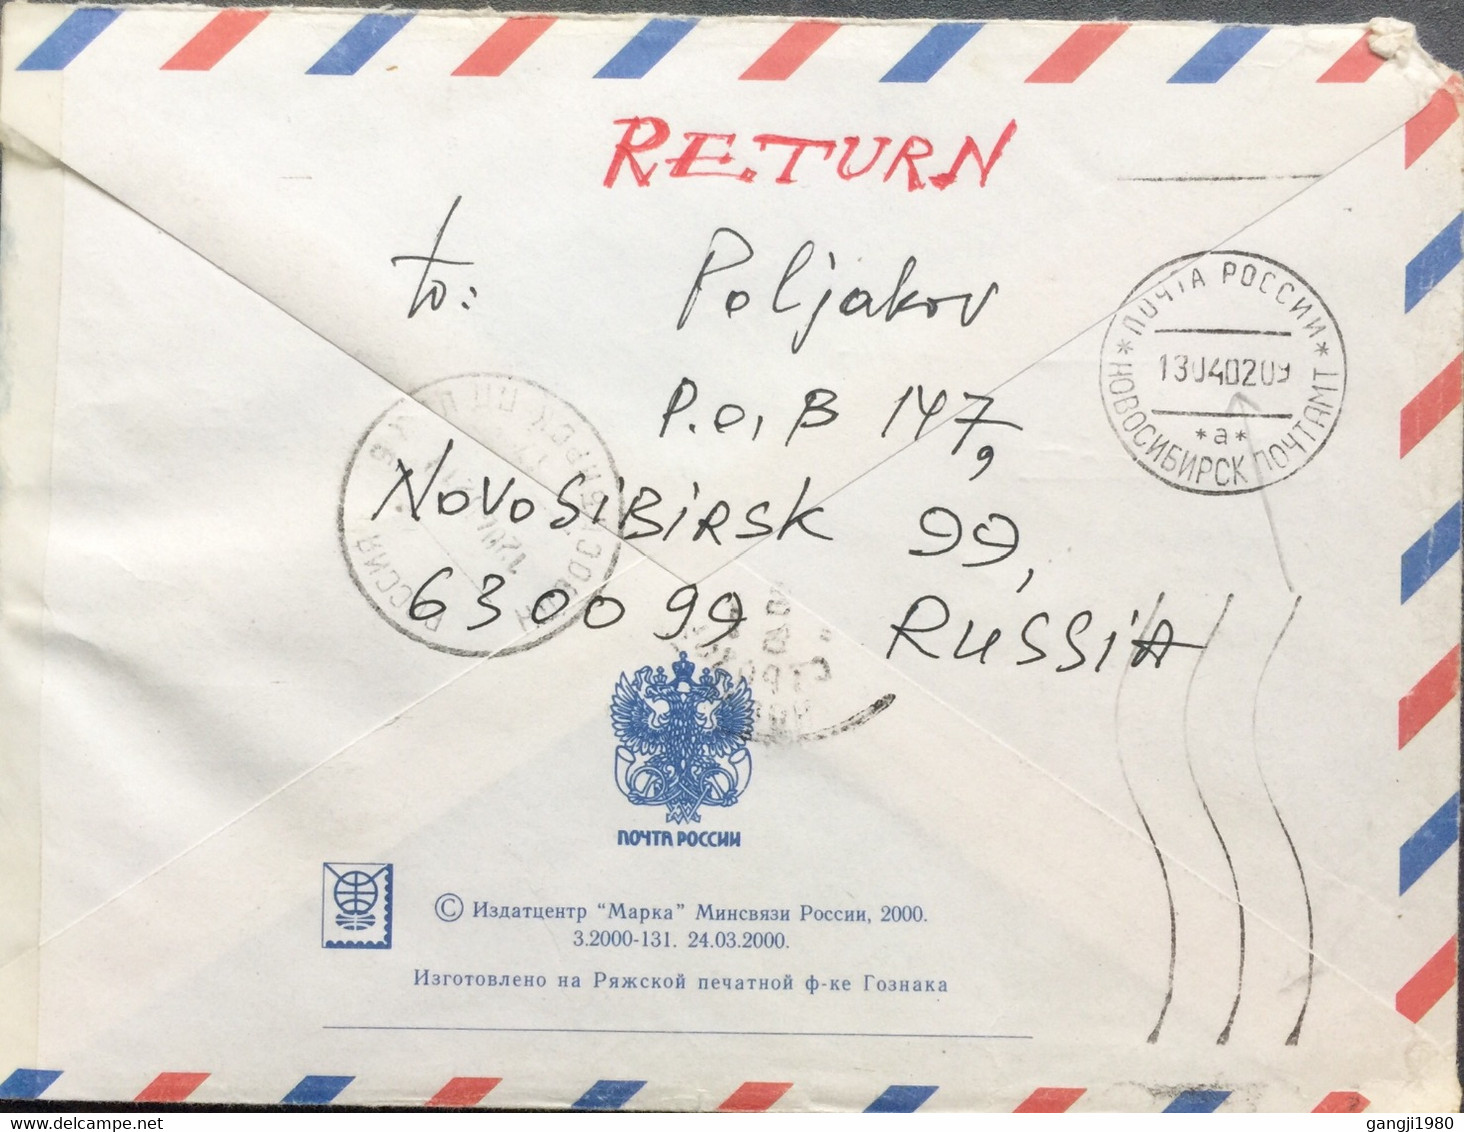 RUSSIA-IRAEL 2001, USED COVER TO ISRAEL,RETURN TO SENDER,NOVO SIBIRSK CANCELLATION! REACHED AFTER 7 MONTH!!! INTERESTING - Covers & Documents